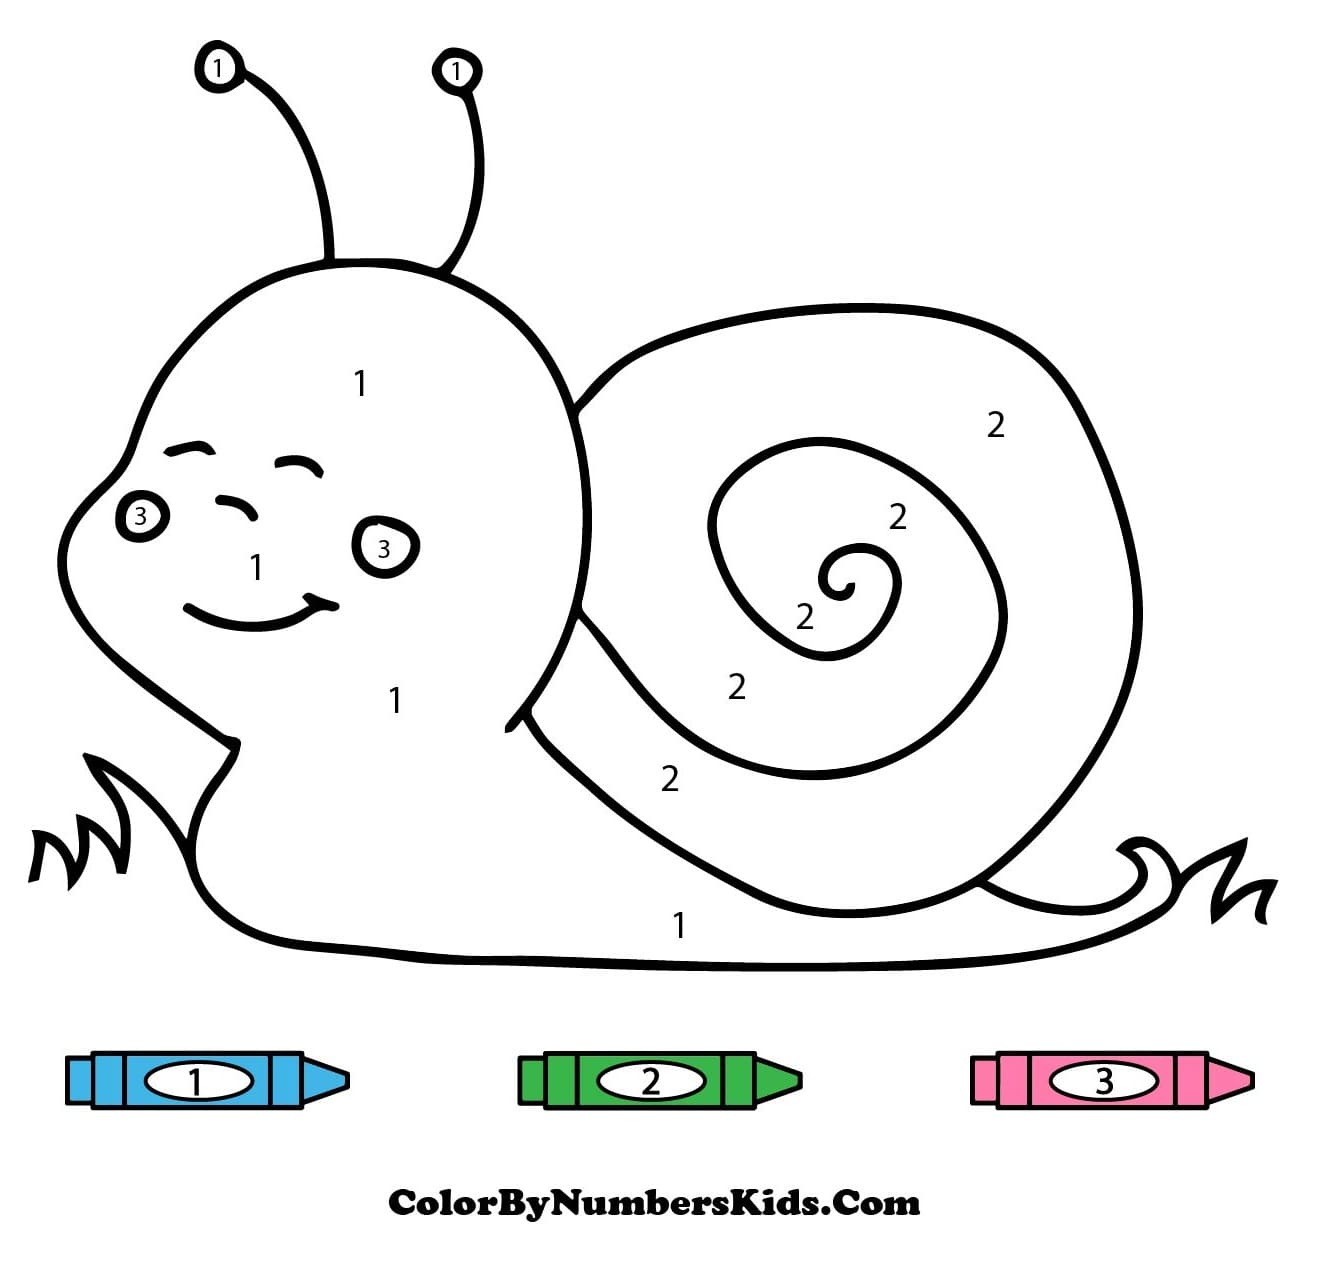 Snail Color By Number For Kids